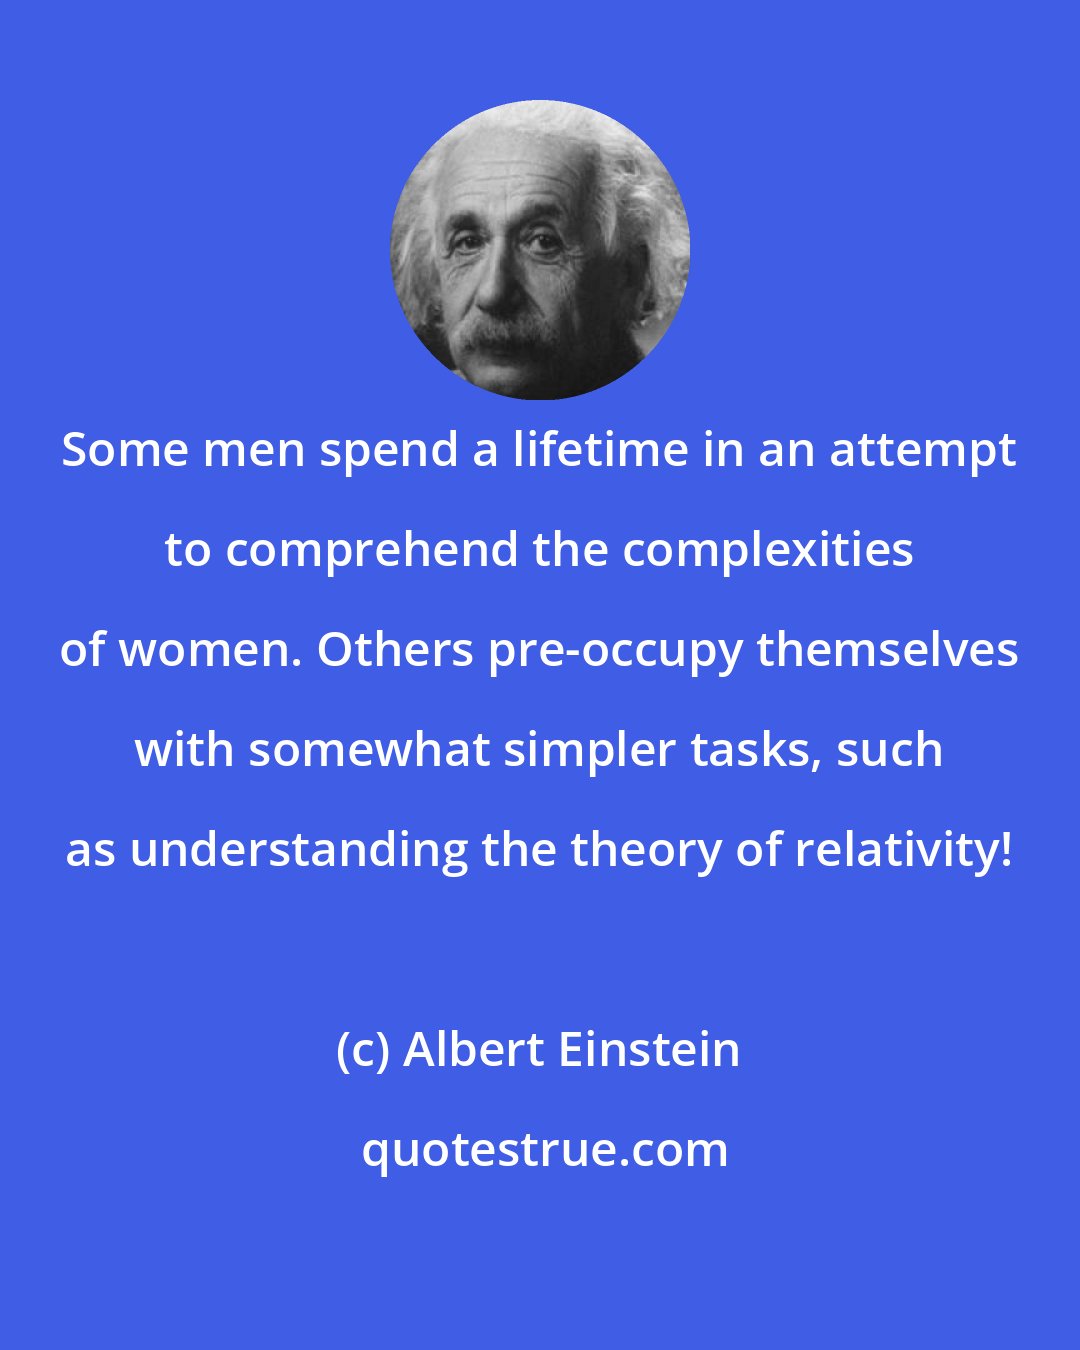 Albert Einstein: Some men spend a lifetime in an attempt to comprehend the complexities of women. Others pre-occupy themselves with somewhat simpler tasks, such as understanding the theory of relativity!